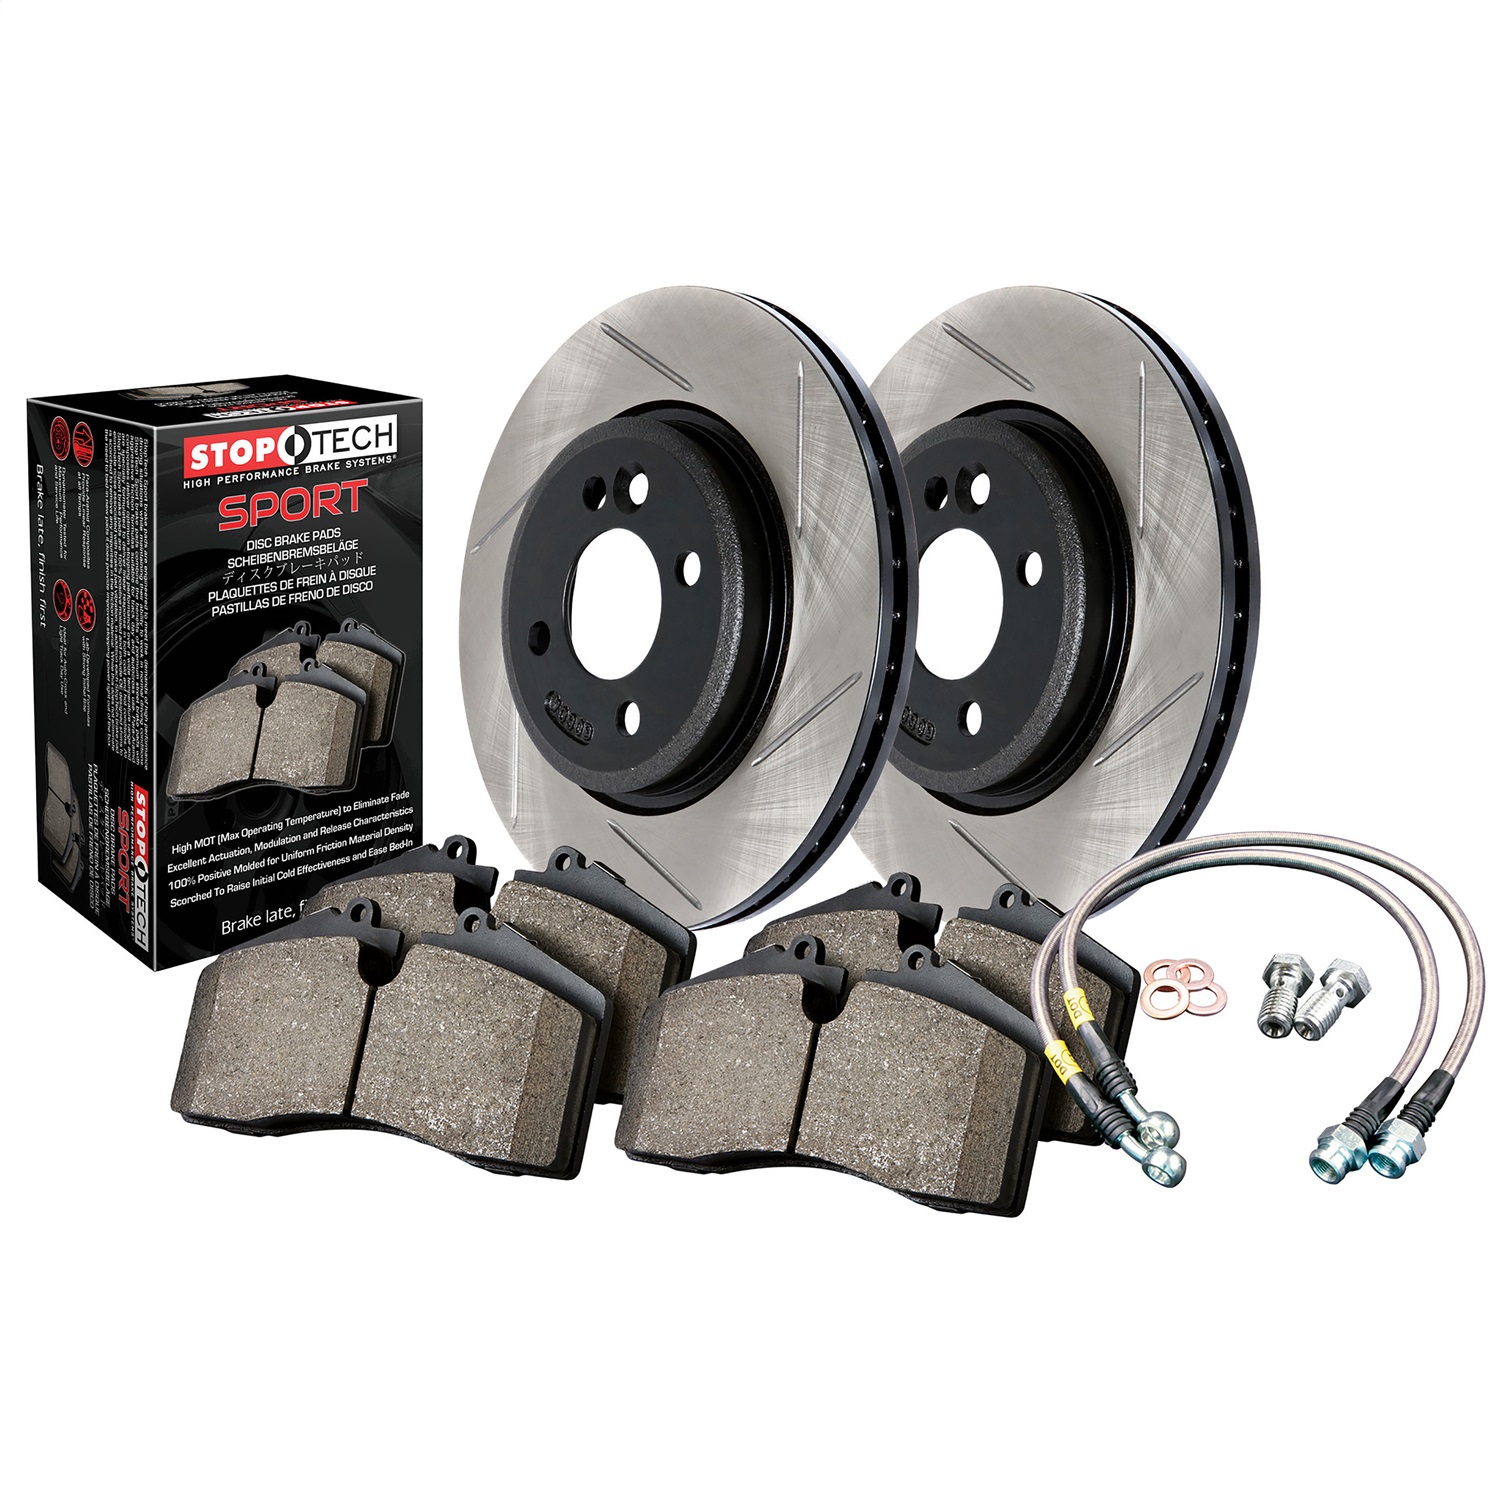 StopTech 977.33010F Sport Disc Brake Kit w/Slotted Rotors